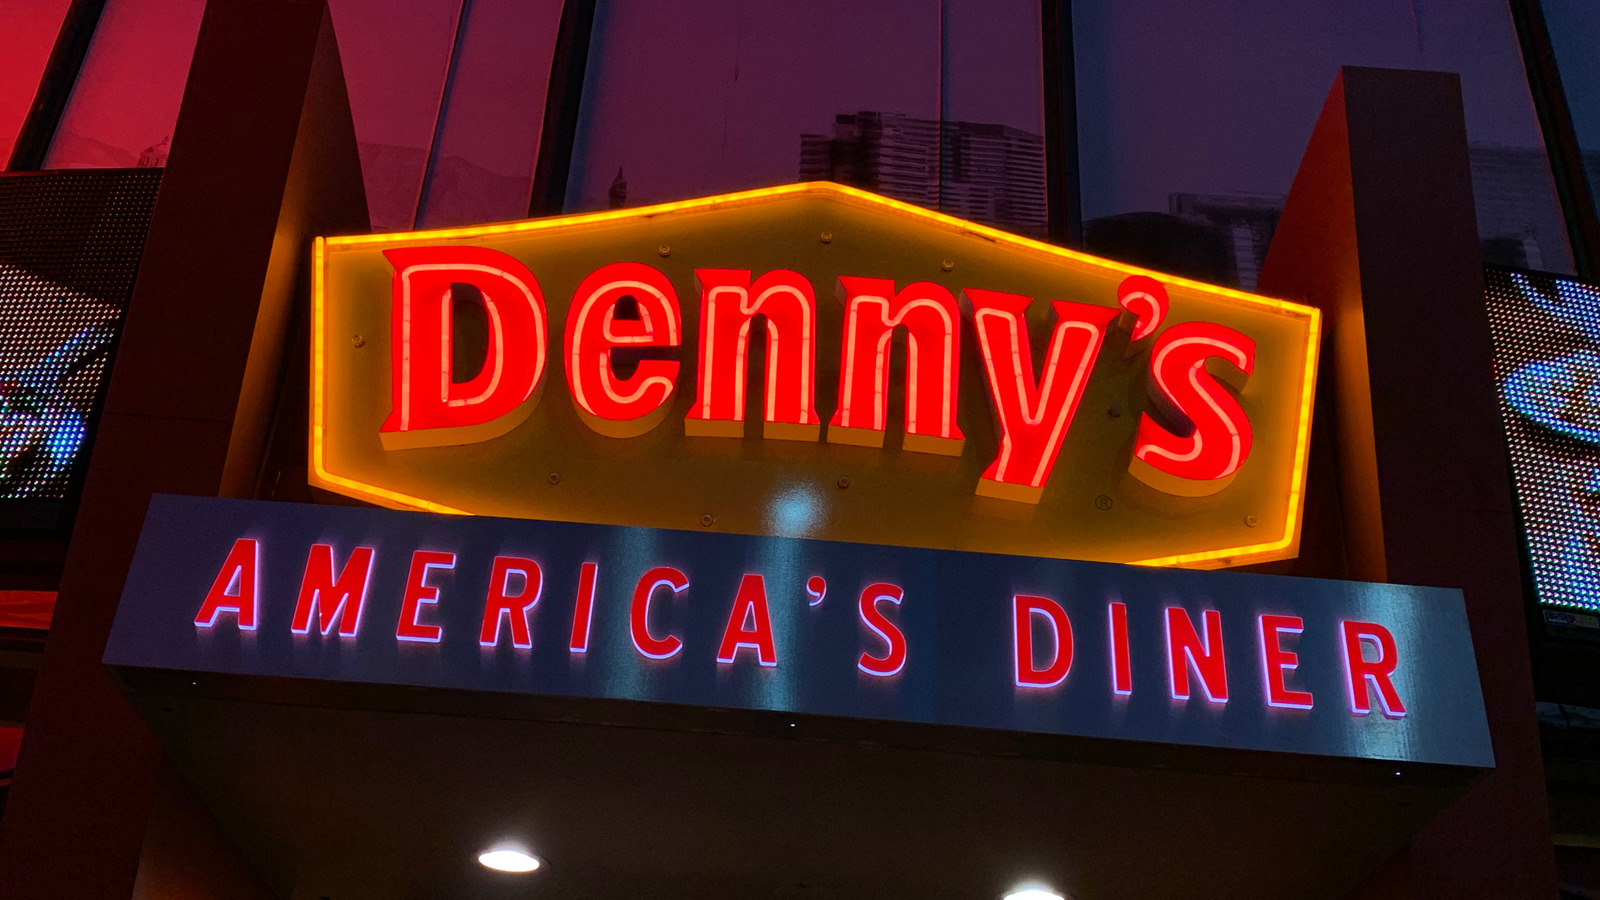 Denny's, the diner chain founded in California, started with a